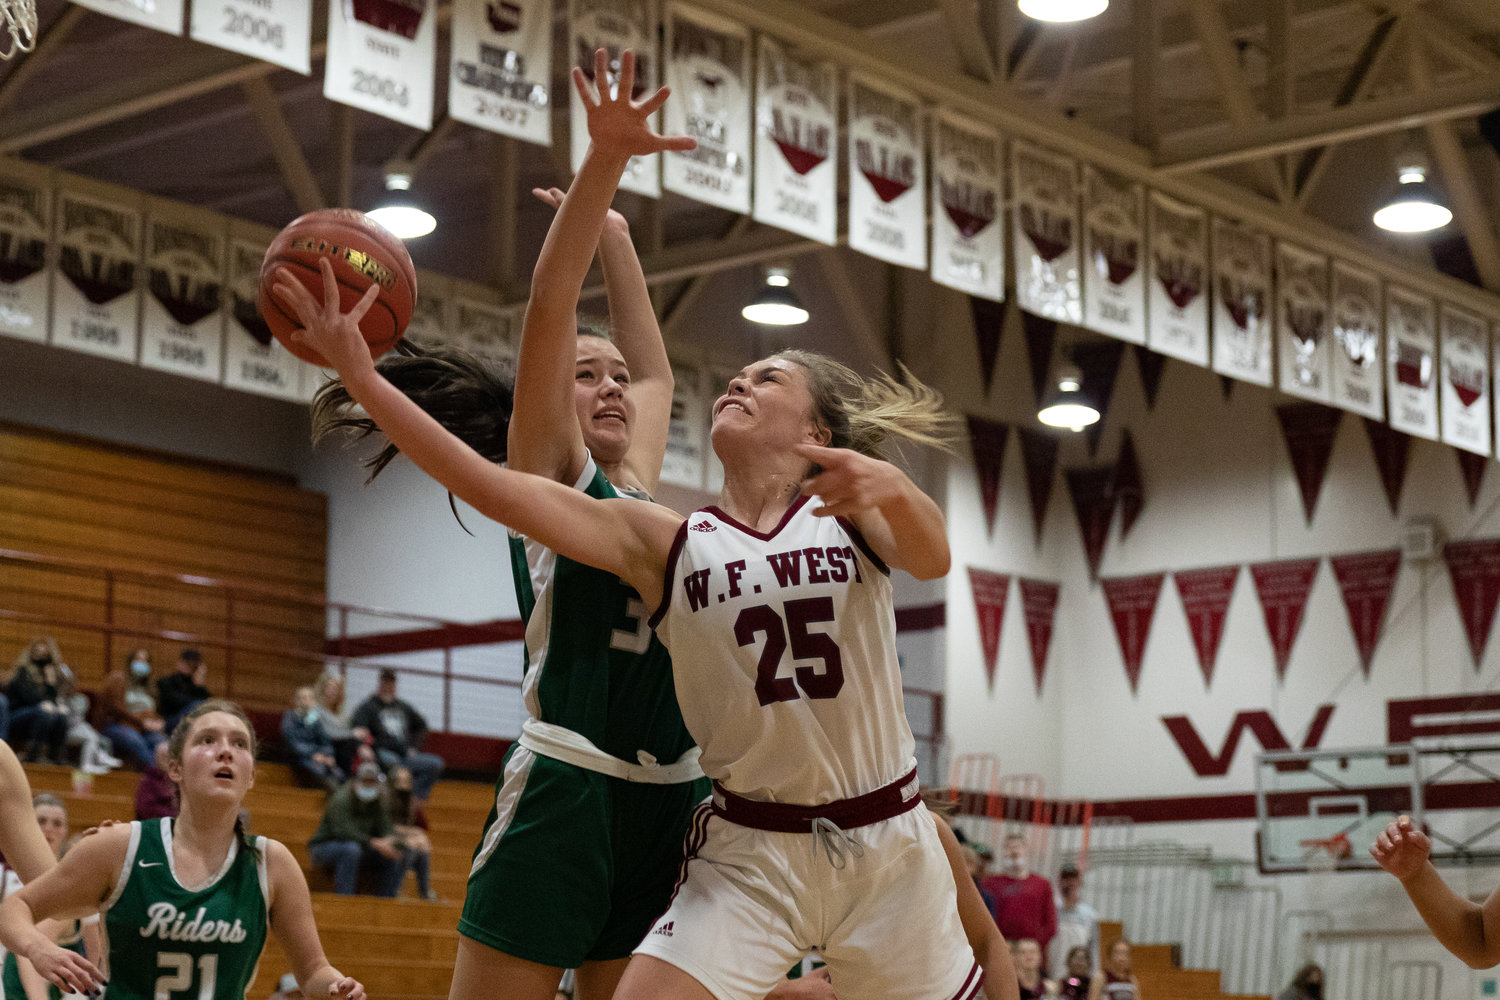 W.F. West guard Kyla McCallum stretches past the defense to put a layup through the net at the end of the first half against Port Angeles Jan. 8.